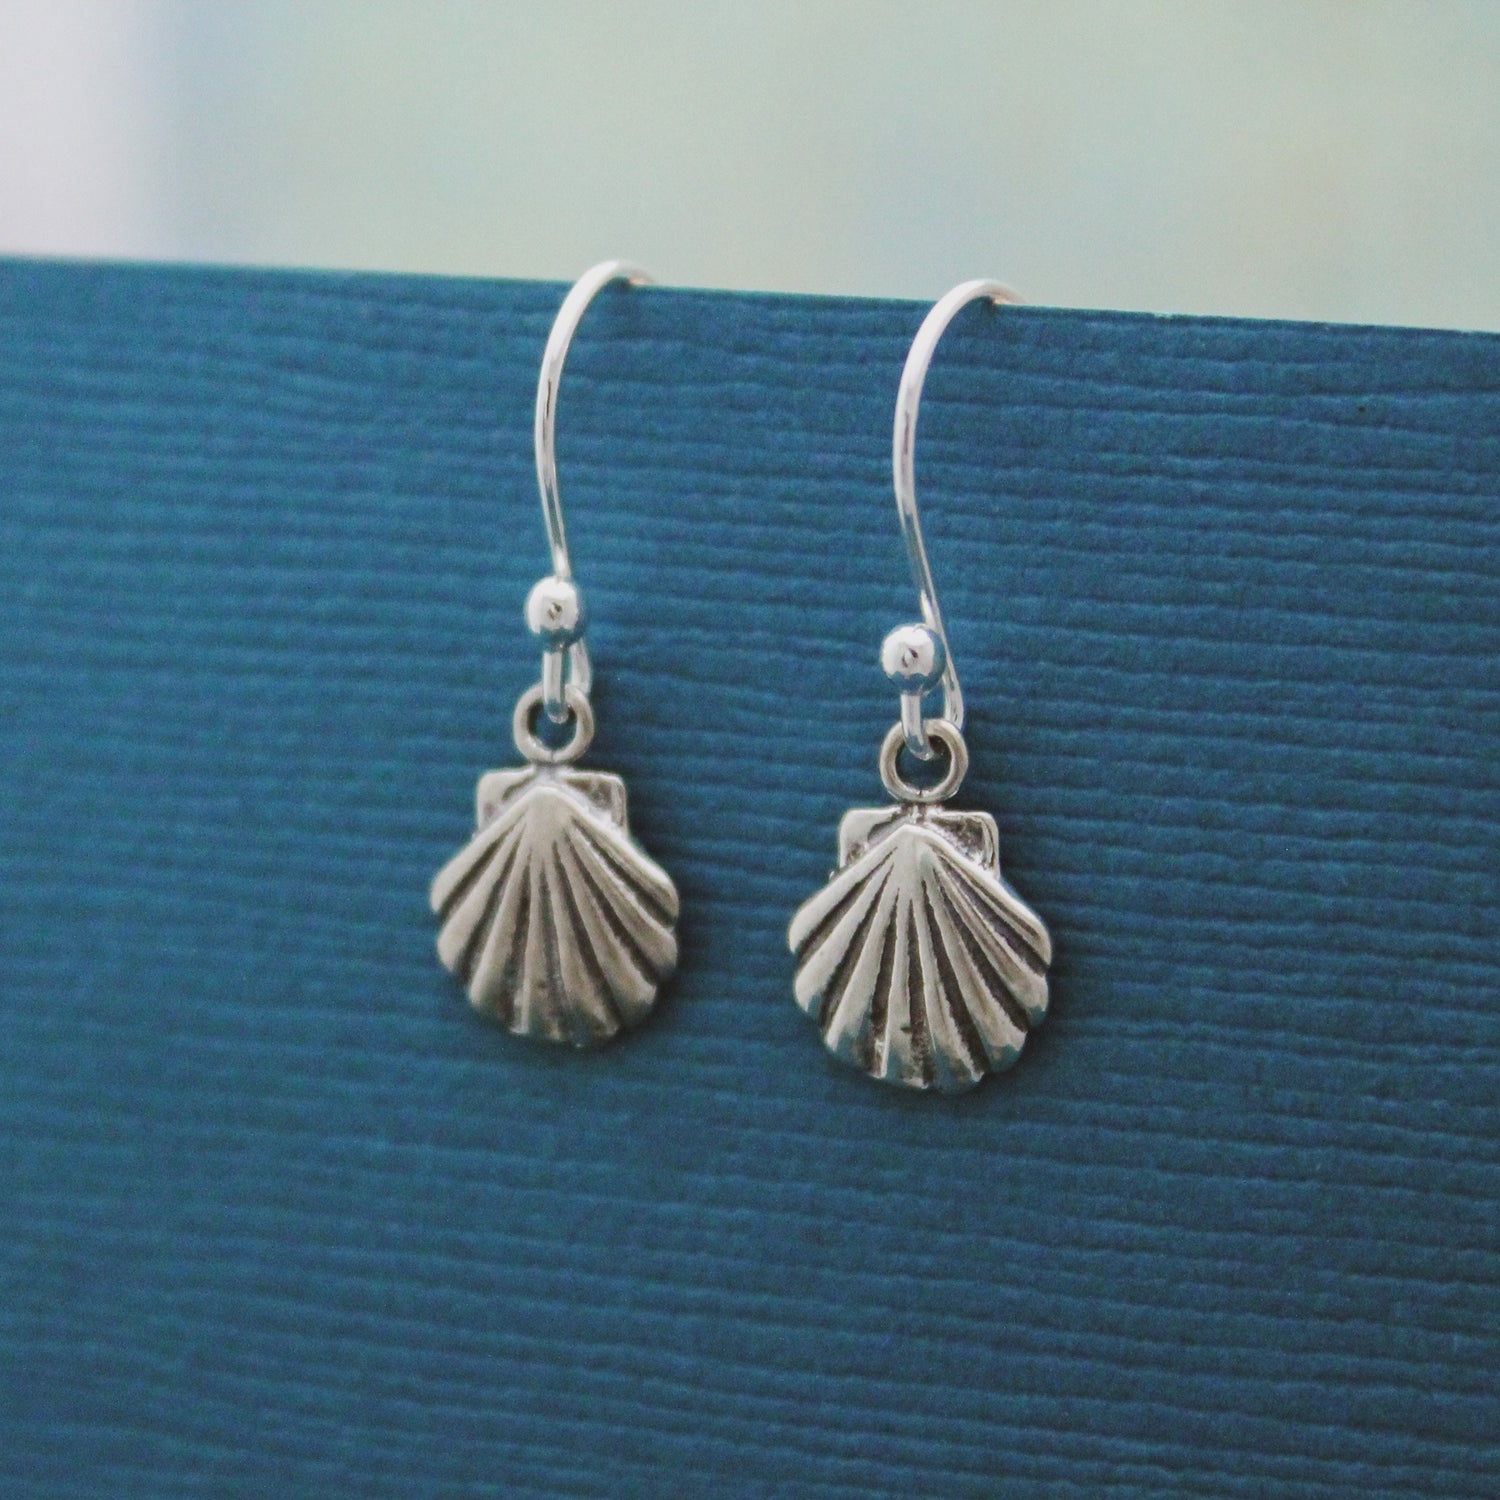 Cute Sea Shell Earrings, Sterling Silver Shell Beach Jewelry, Sea Shell Jewelry, Sterling Silver Sea Shell Shore Jewelry Gift, Gifts for Her